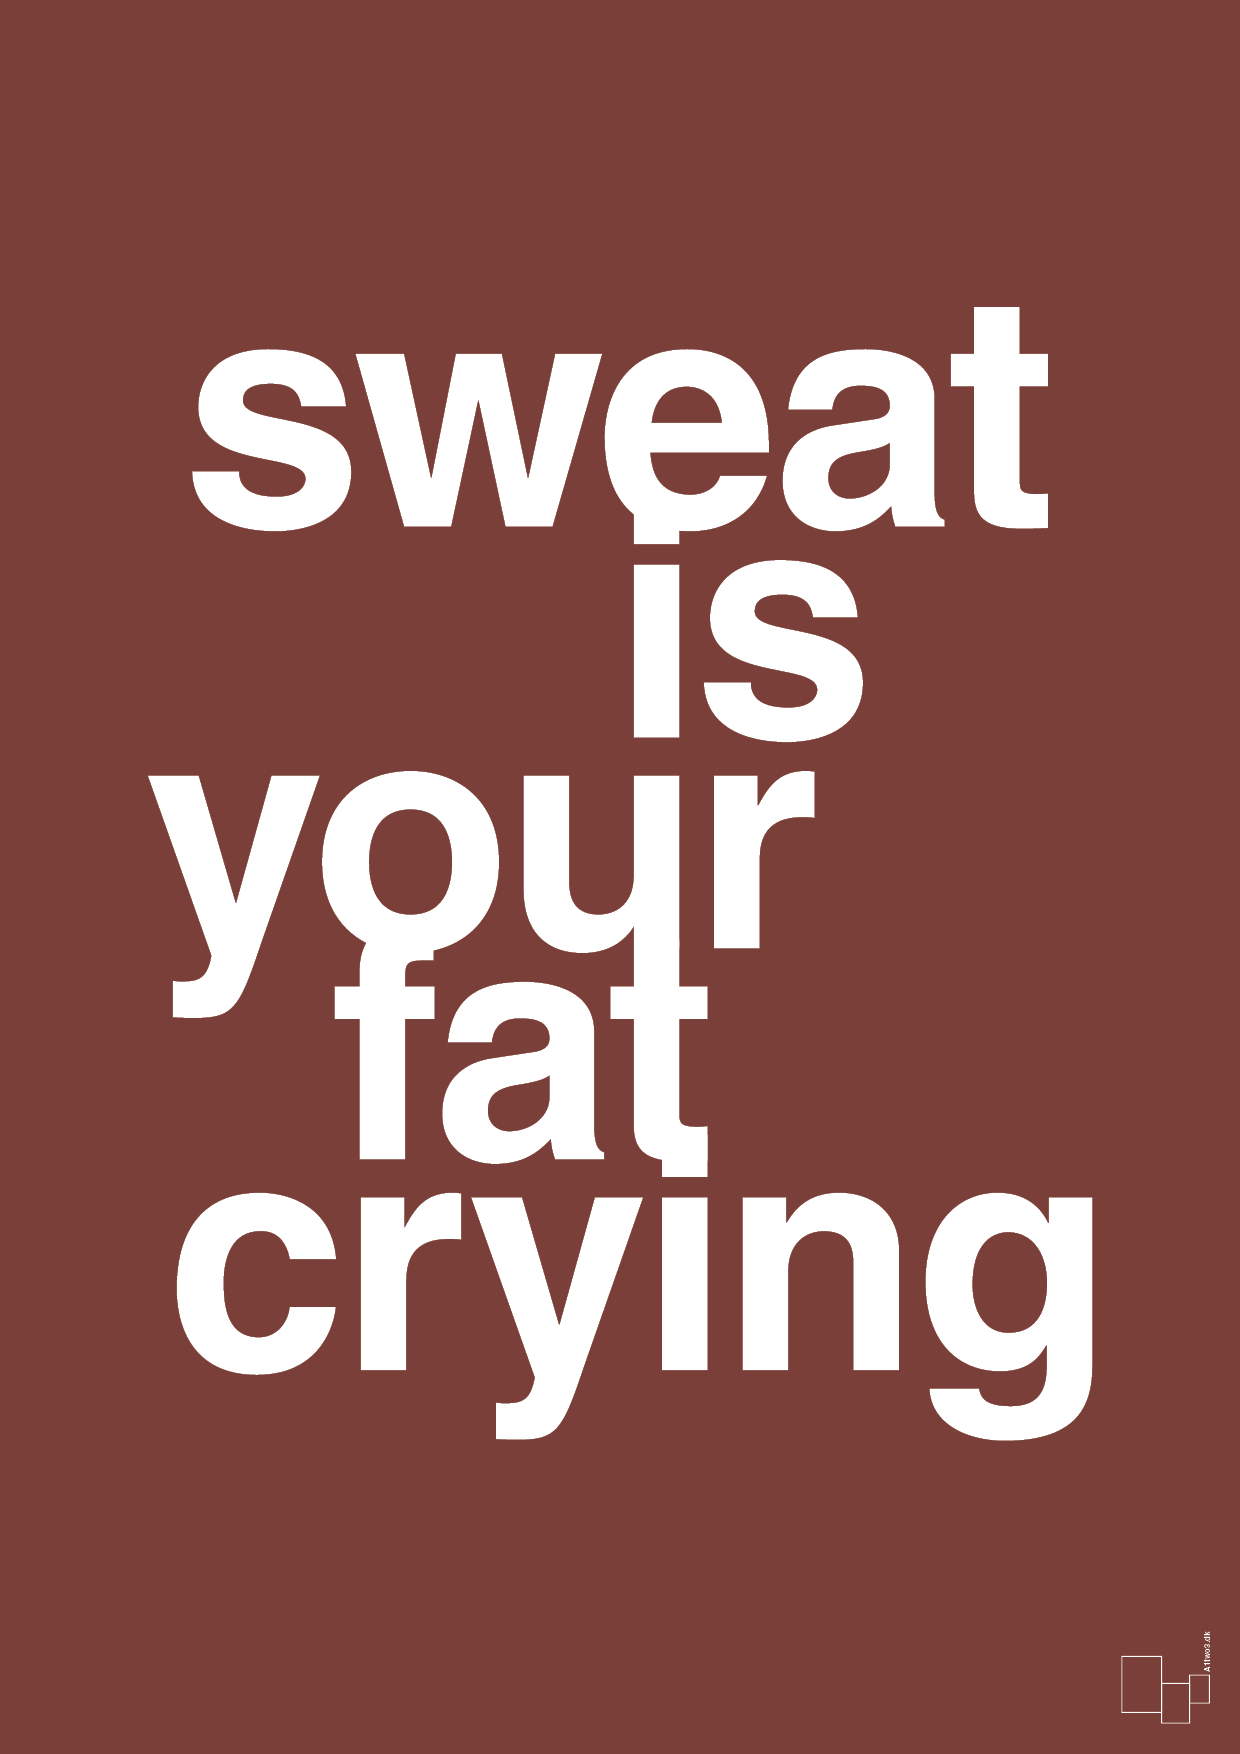 sweat is your fat crying - Plakat med Sport & Fritid i Red Pepper